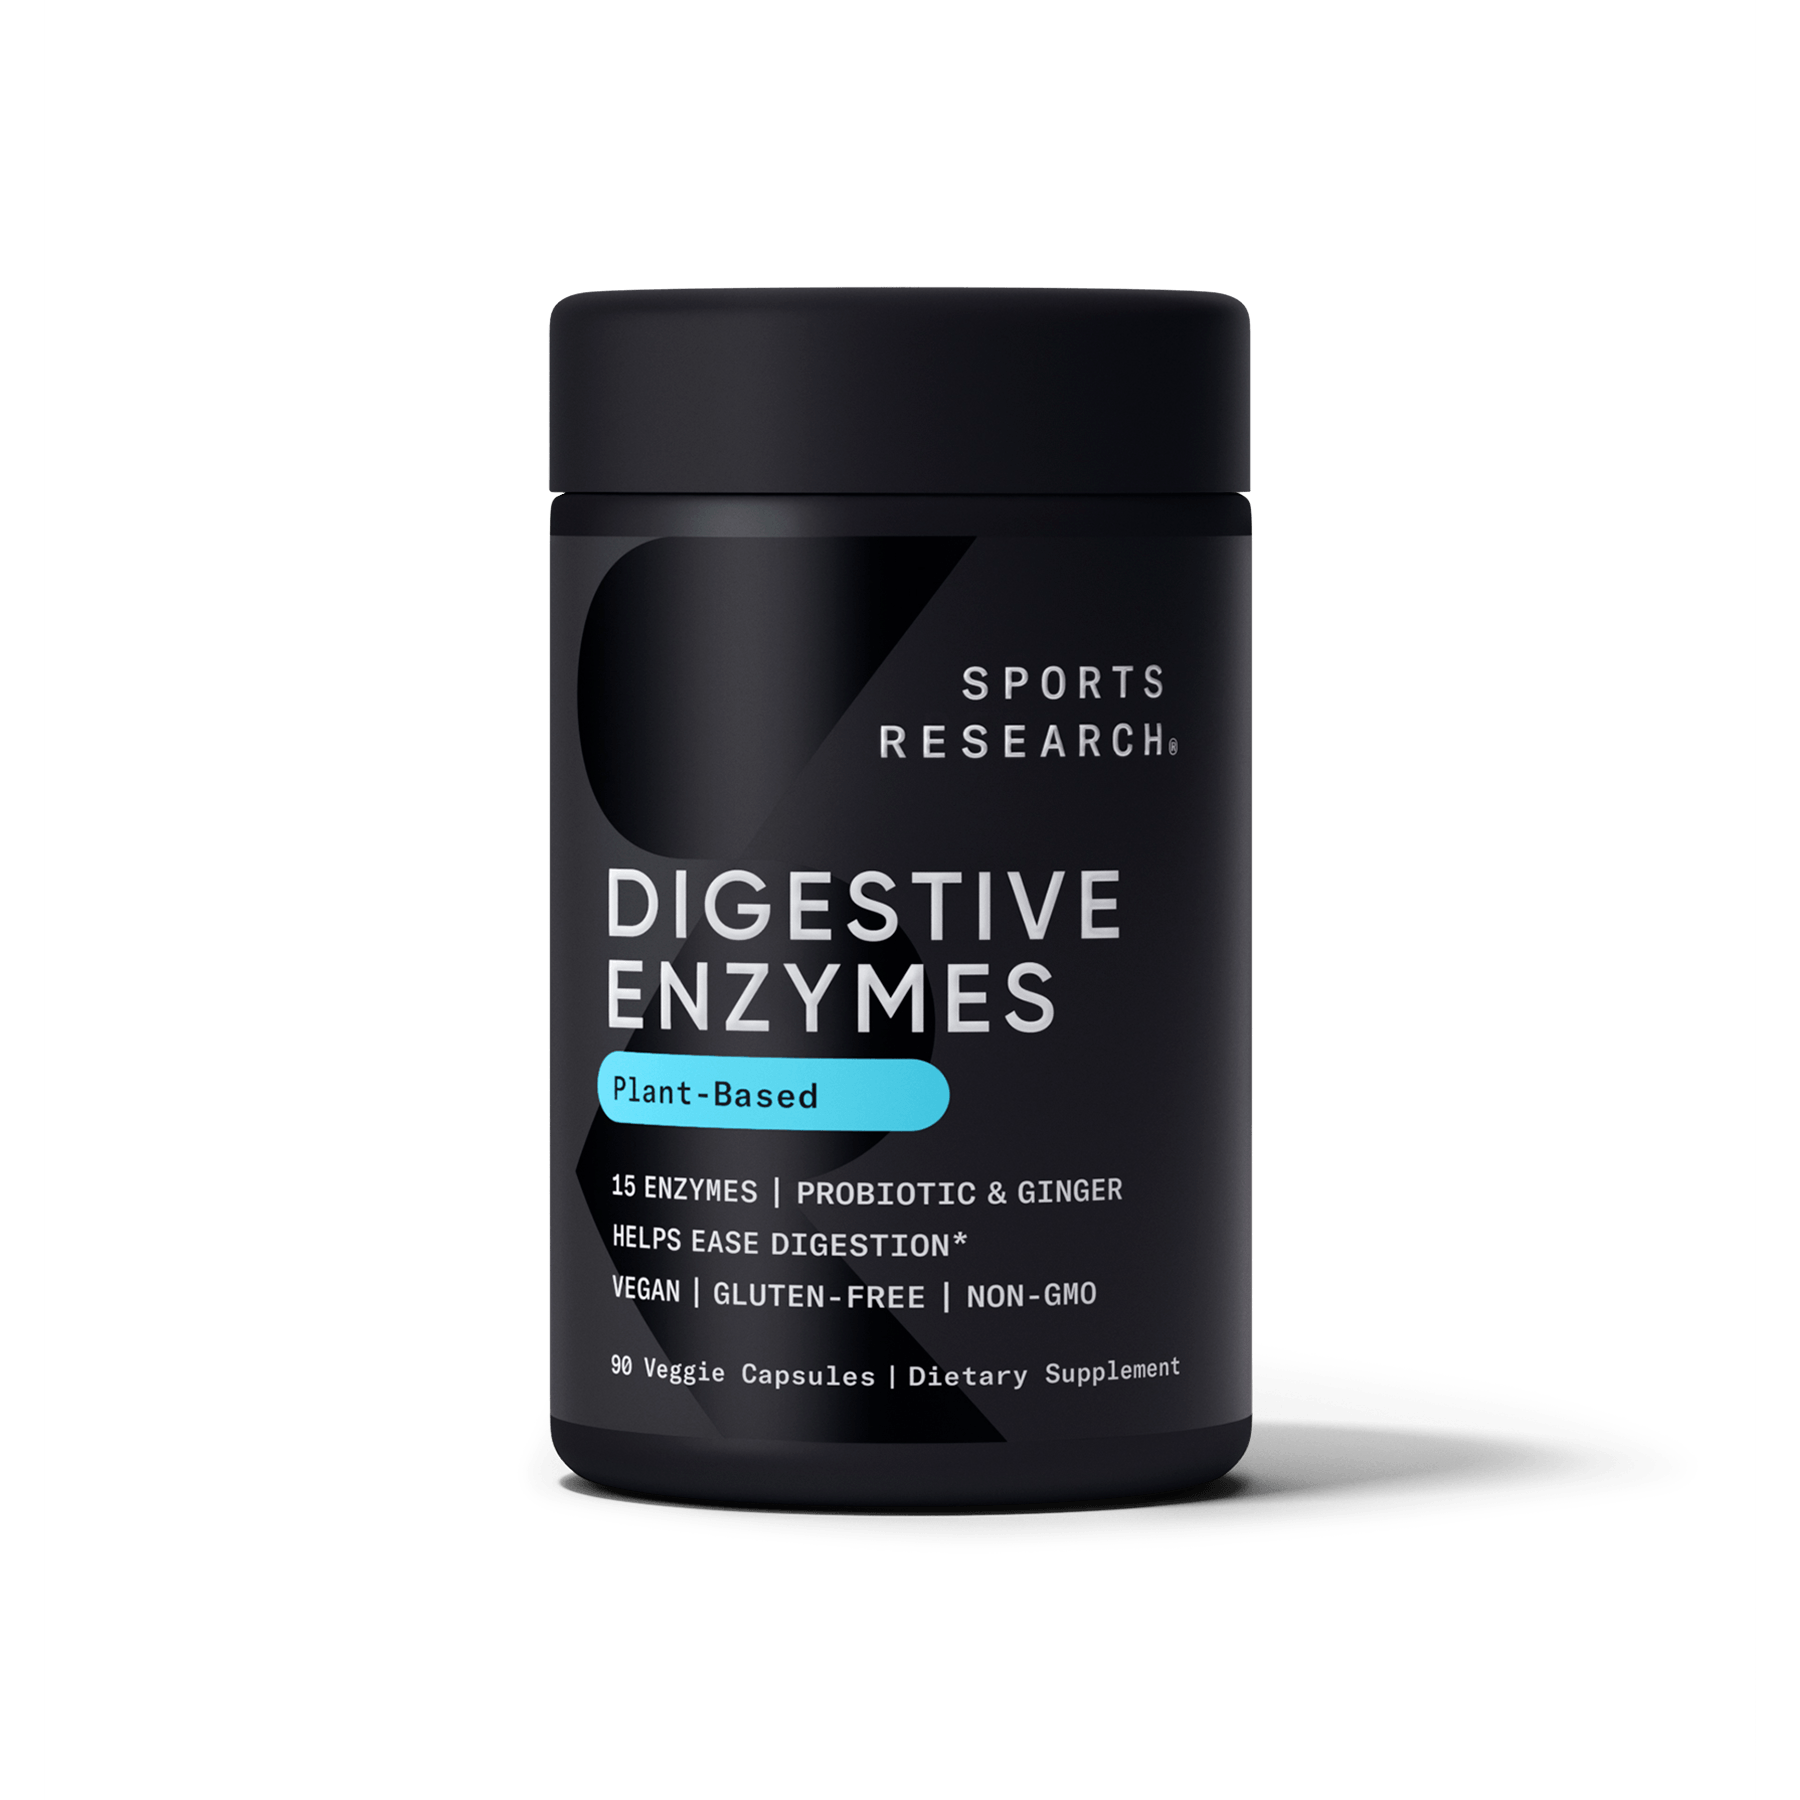 Sports Research Digestive Enzymes with Probiotic and Ginger.